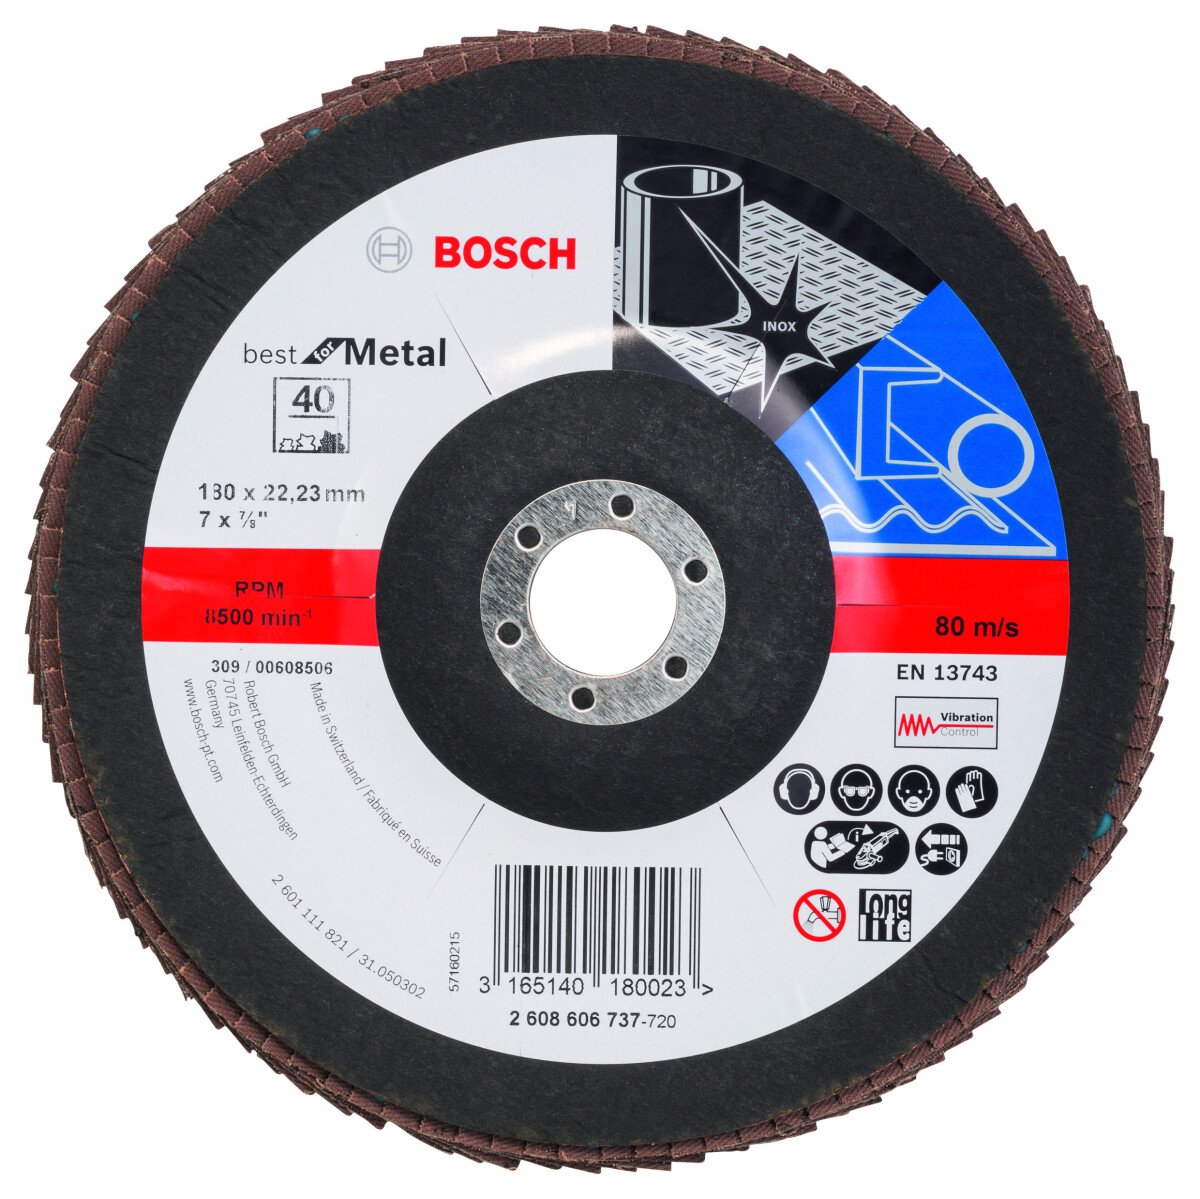 Bosch 2608606737 Flap Sanding discs for Angle Grinders . 180x22 G40